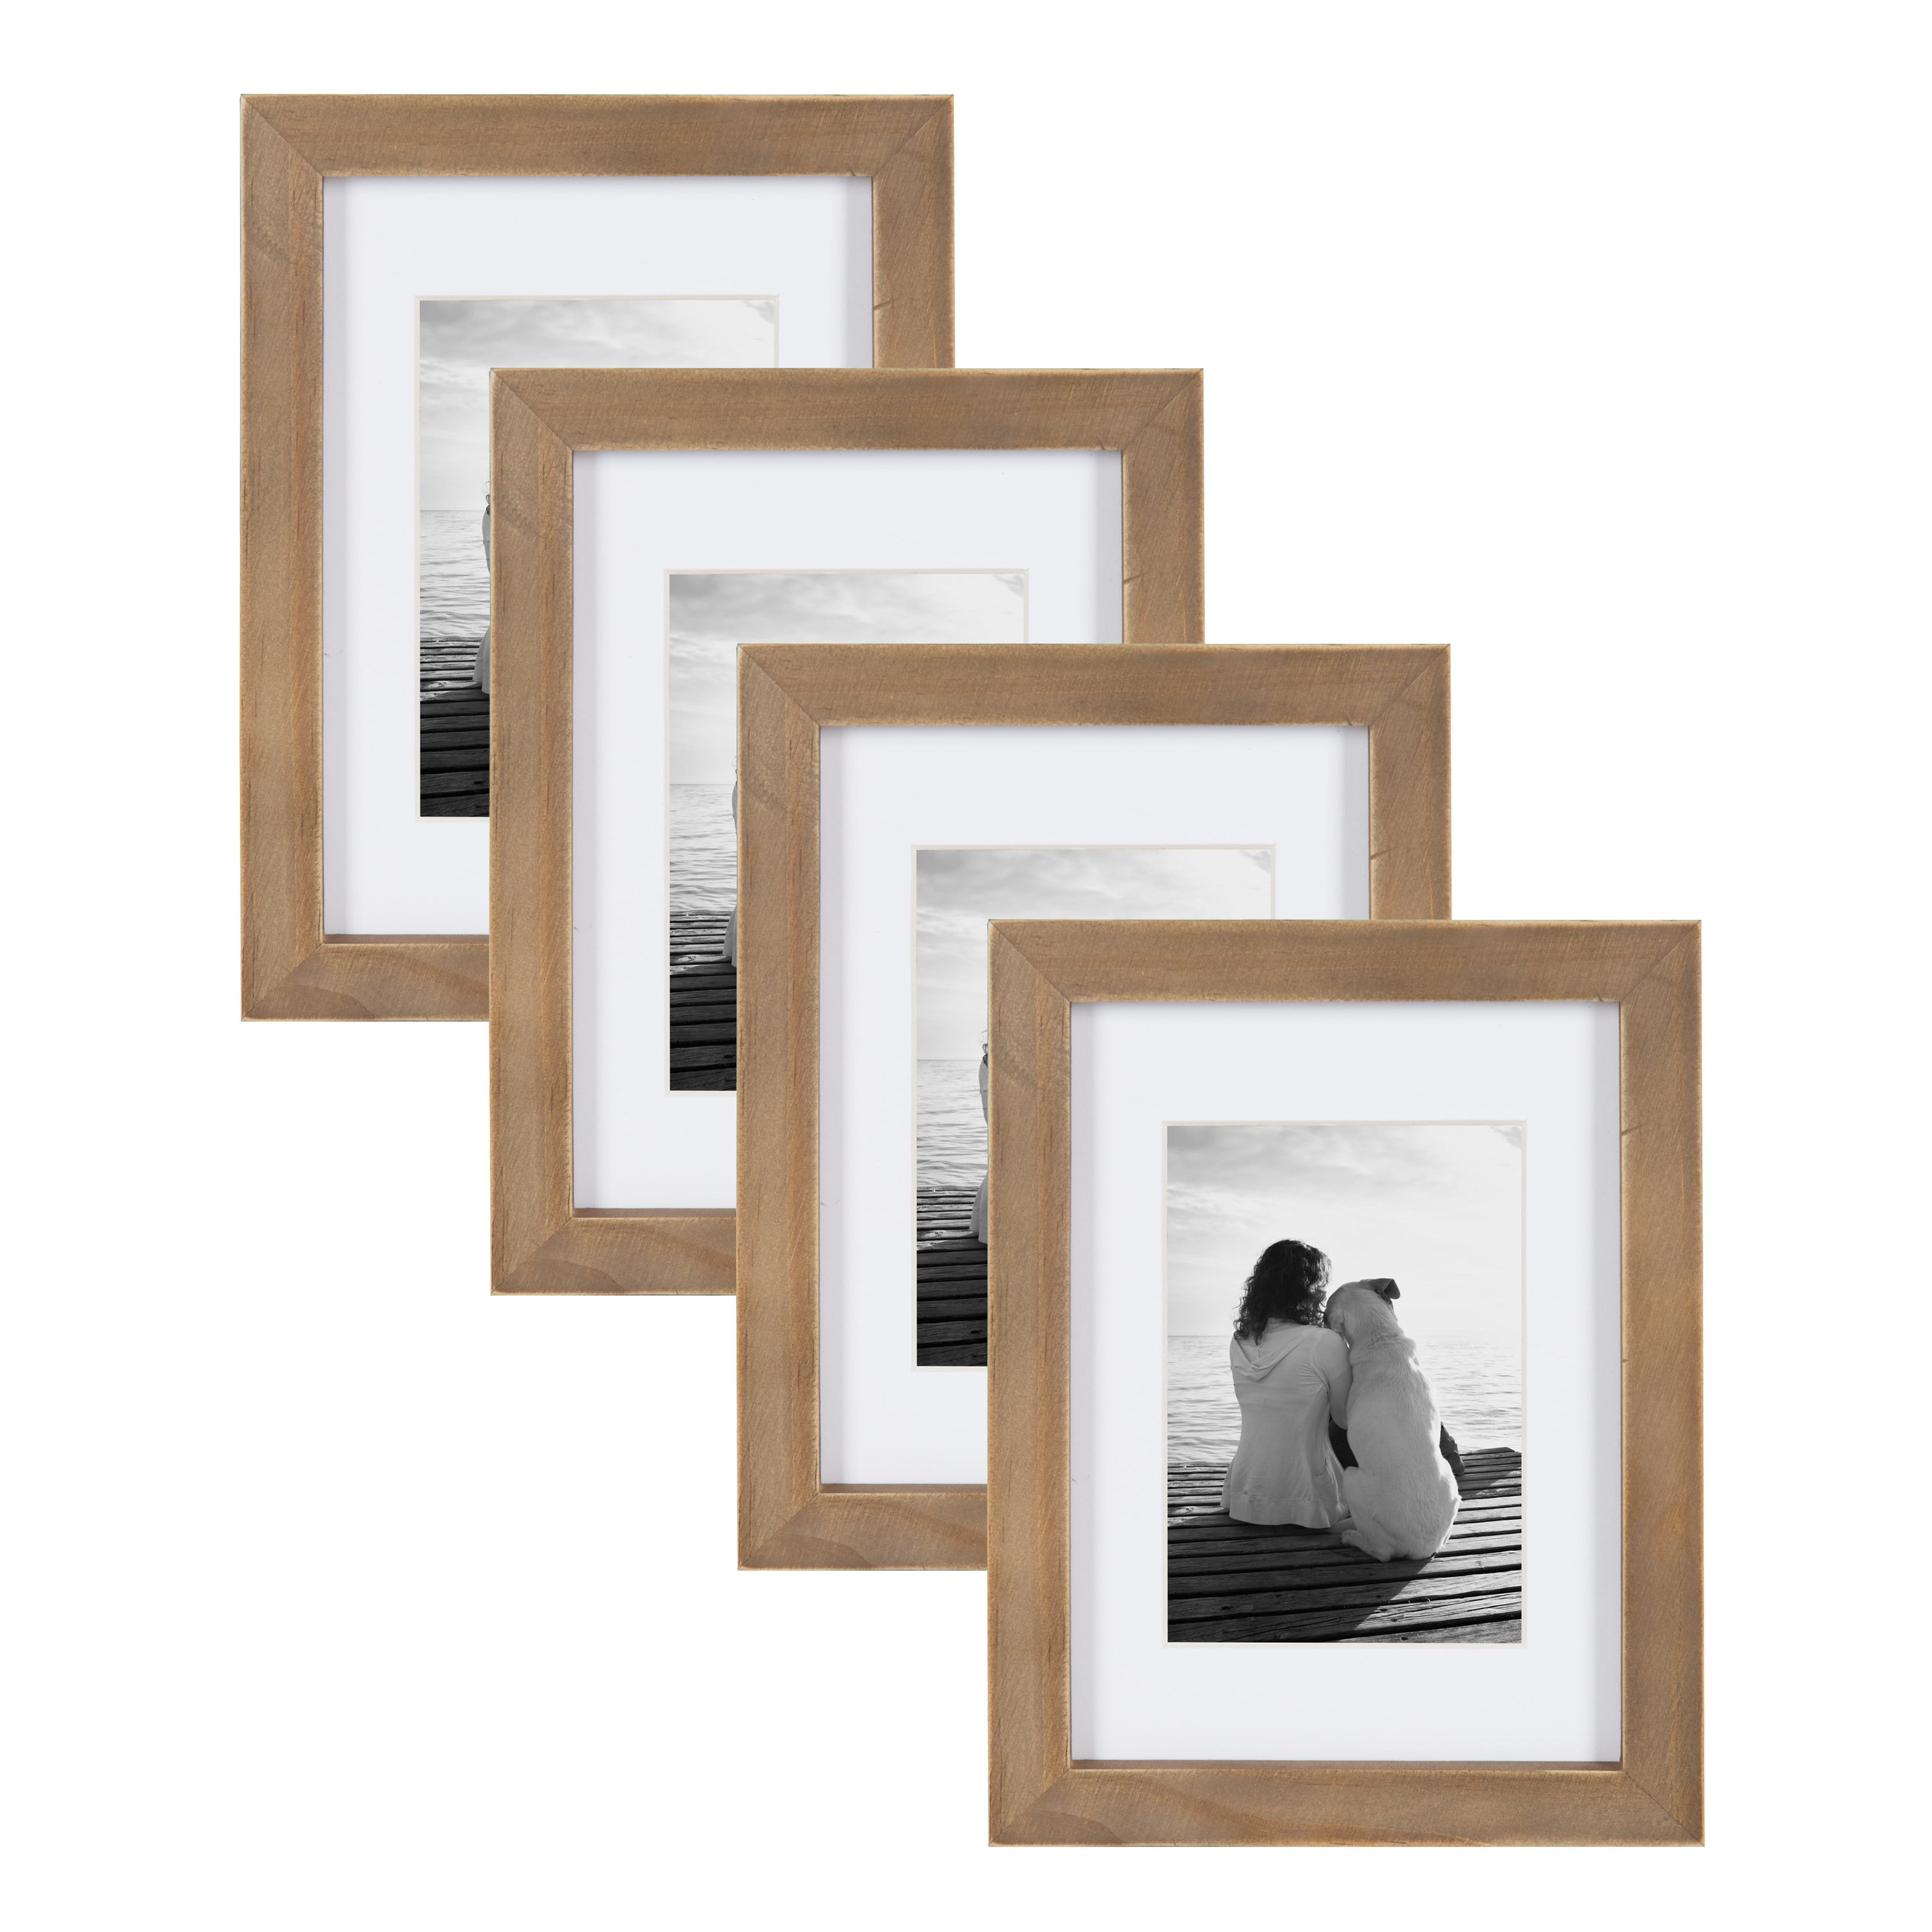 Set of 3 Reclaimed Wood 8 x 10 Picture Frames picture frames